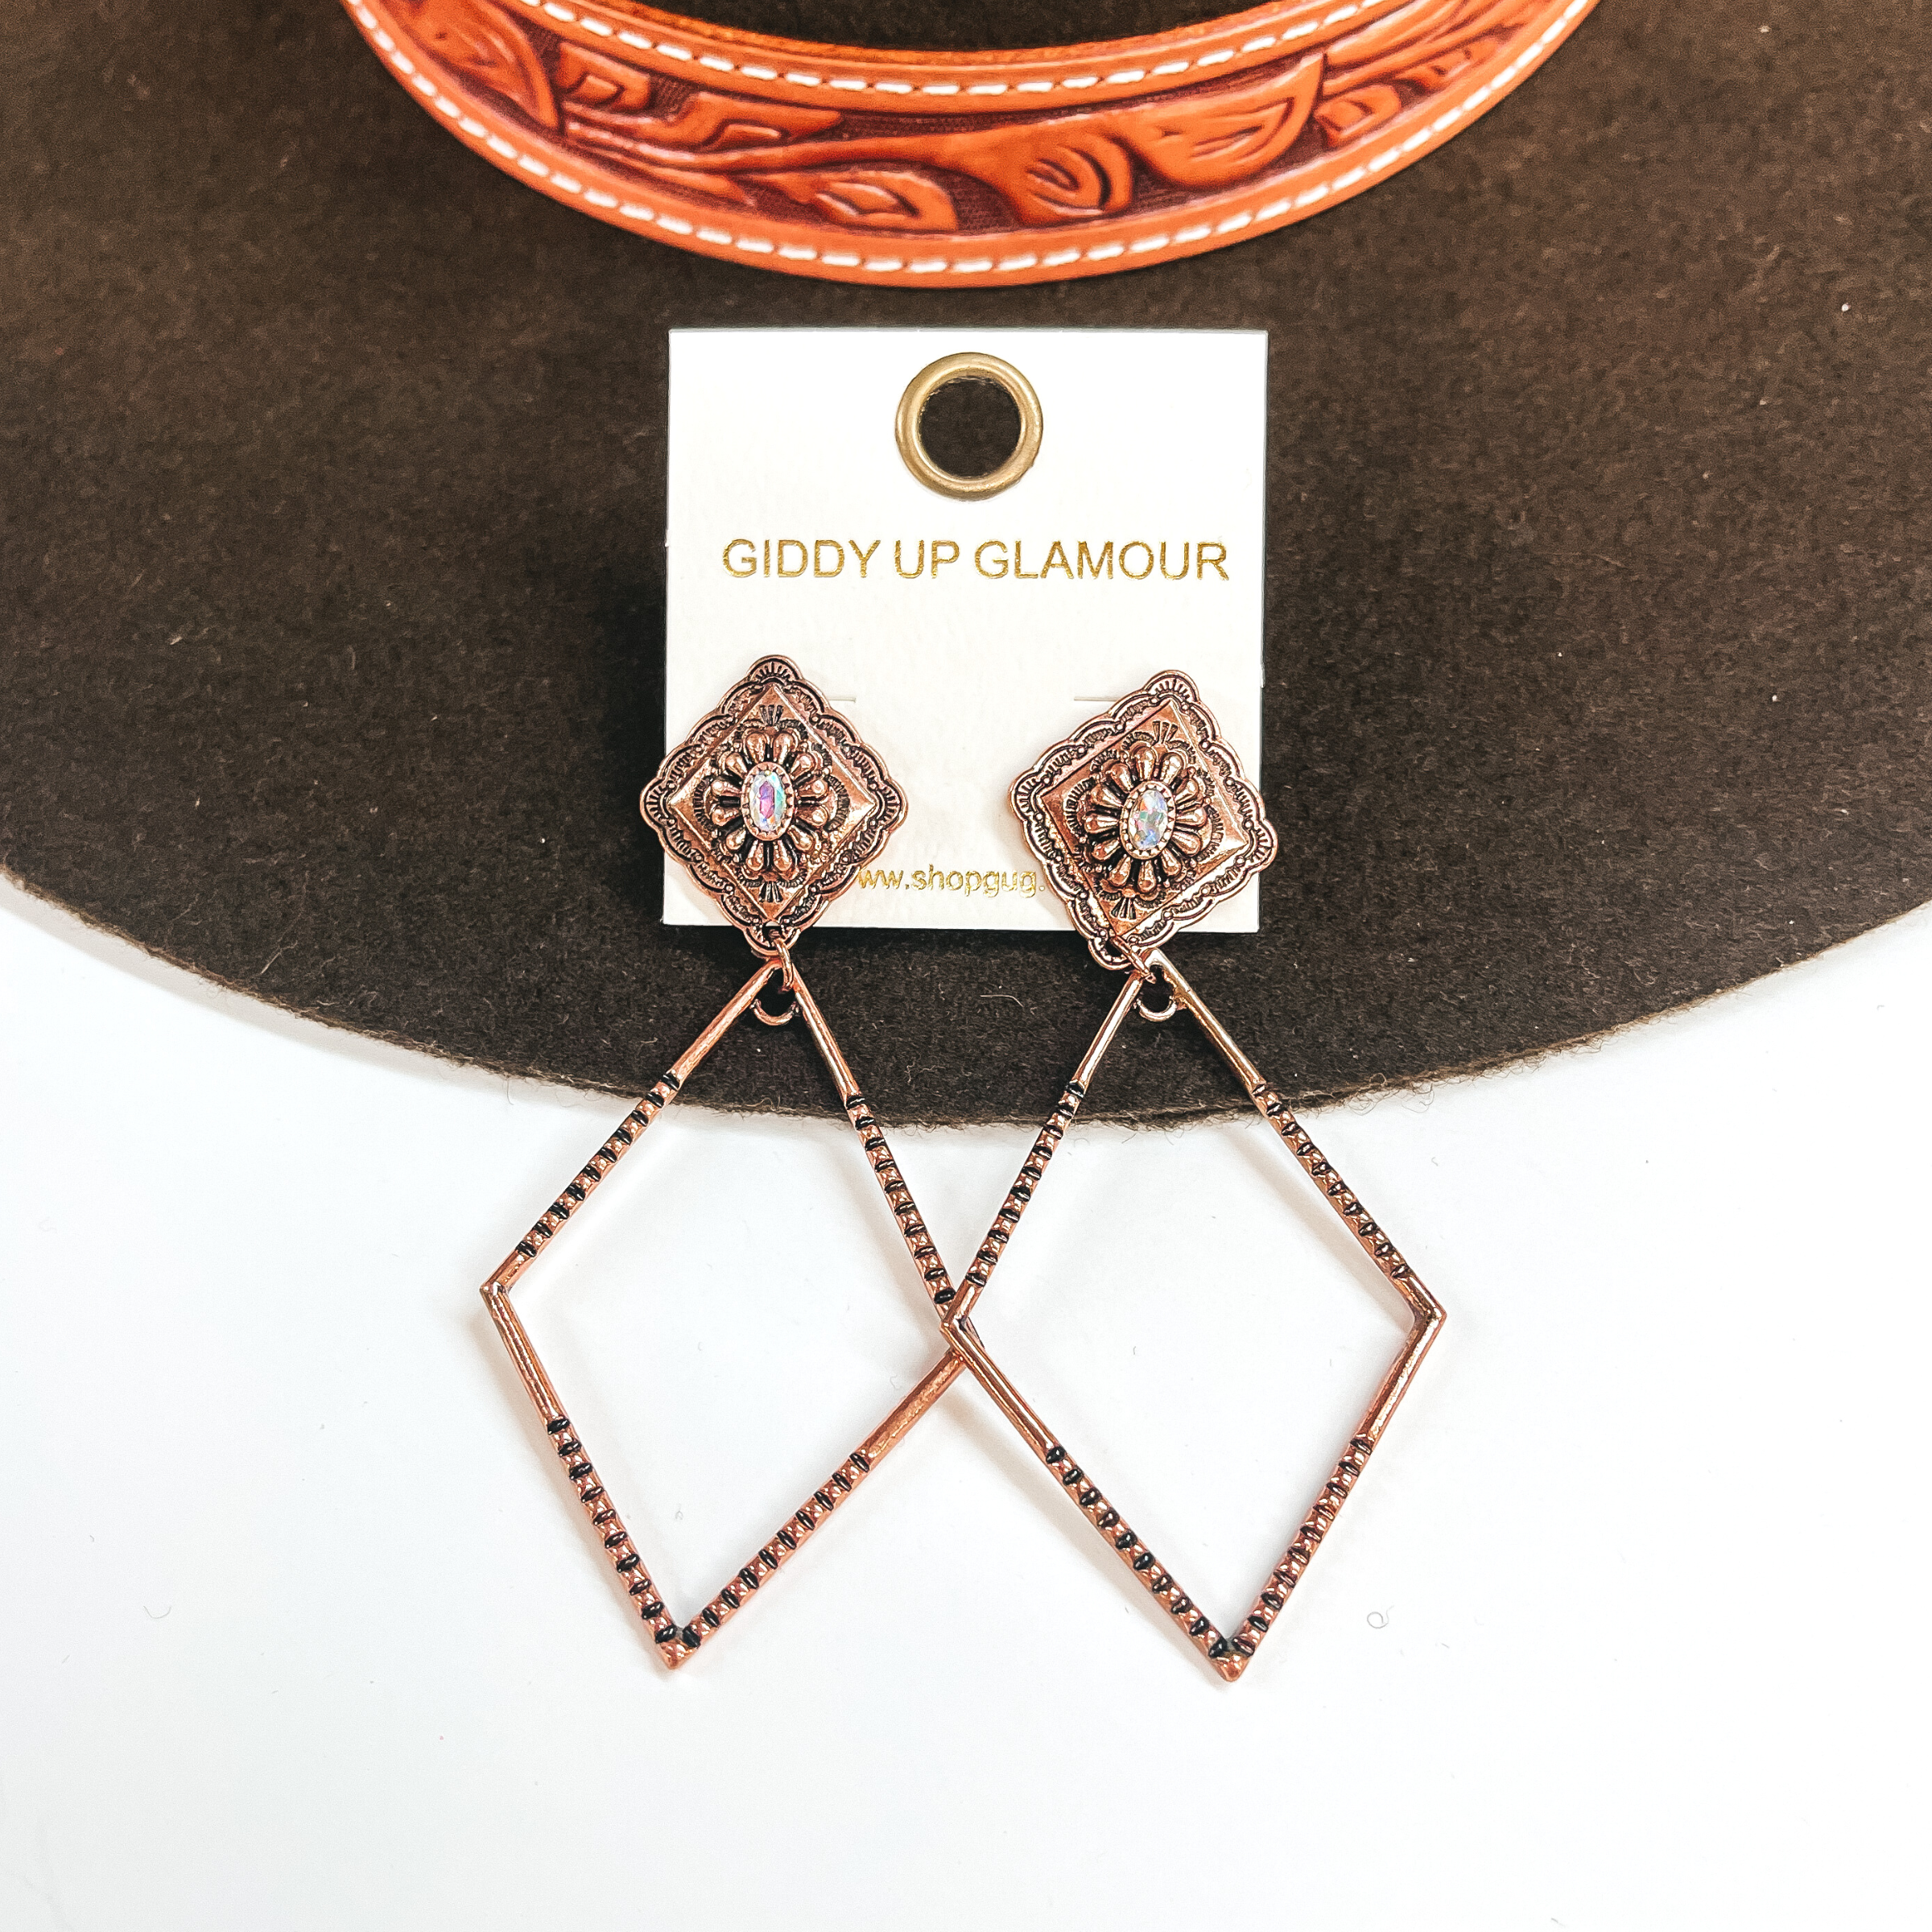 These are copper diamond shaped post back earrings  with an AB crystal in the center. It has a  diamond drop as well with textured sides. These  earrings are taken on a dark brown felt hat and a  white background.